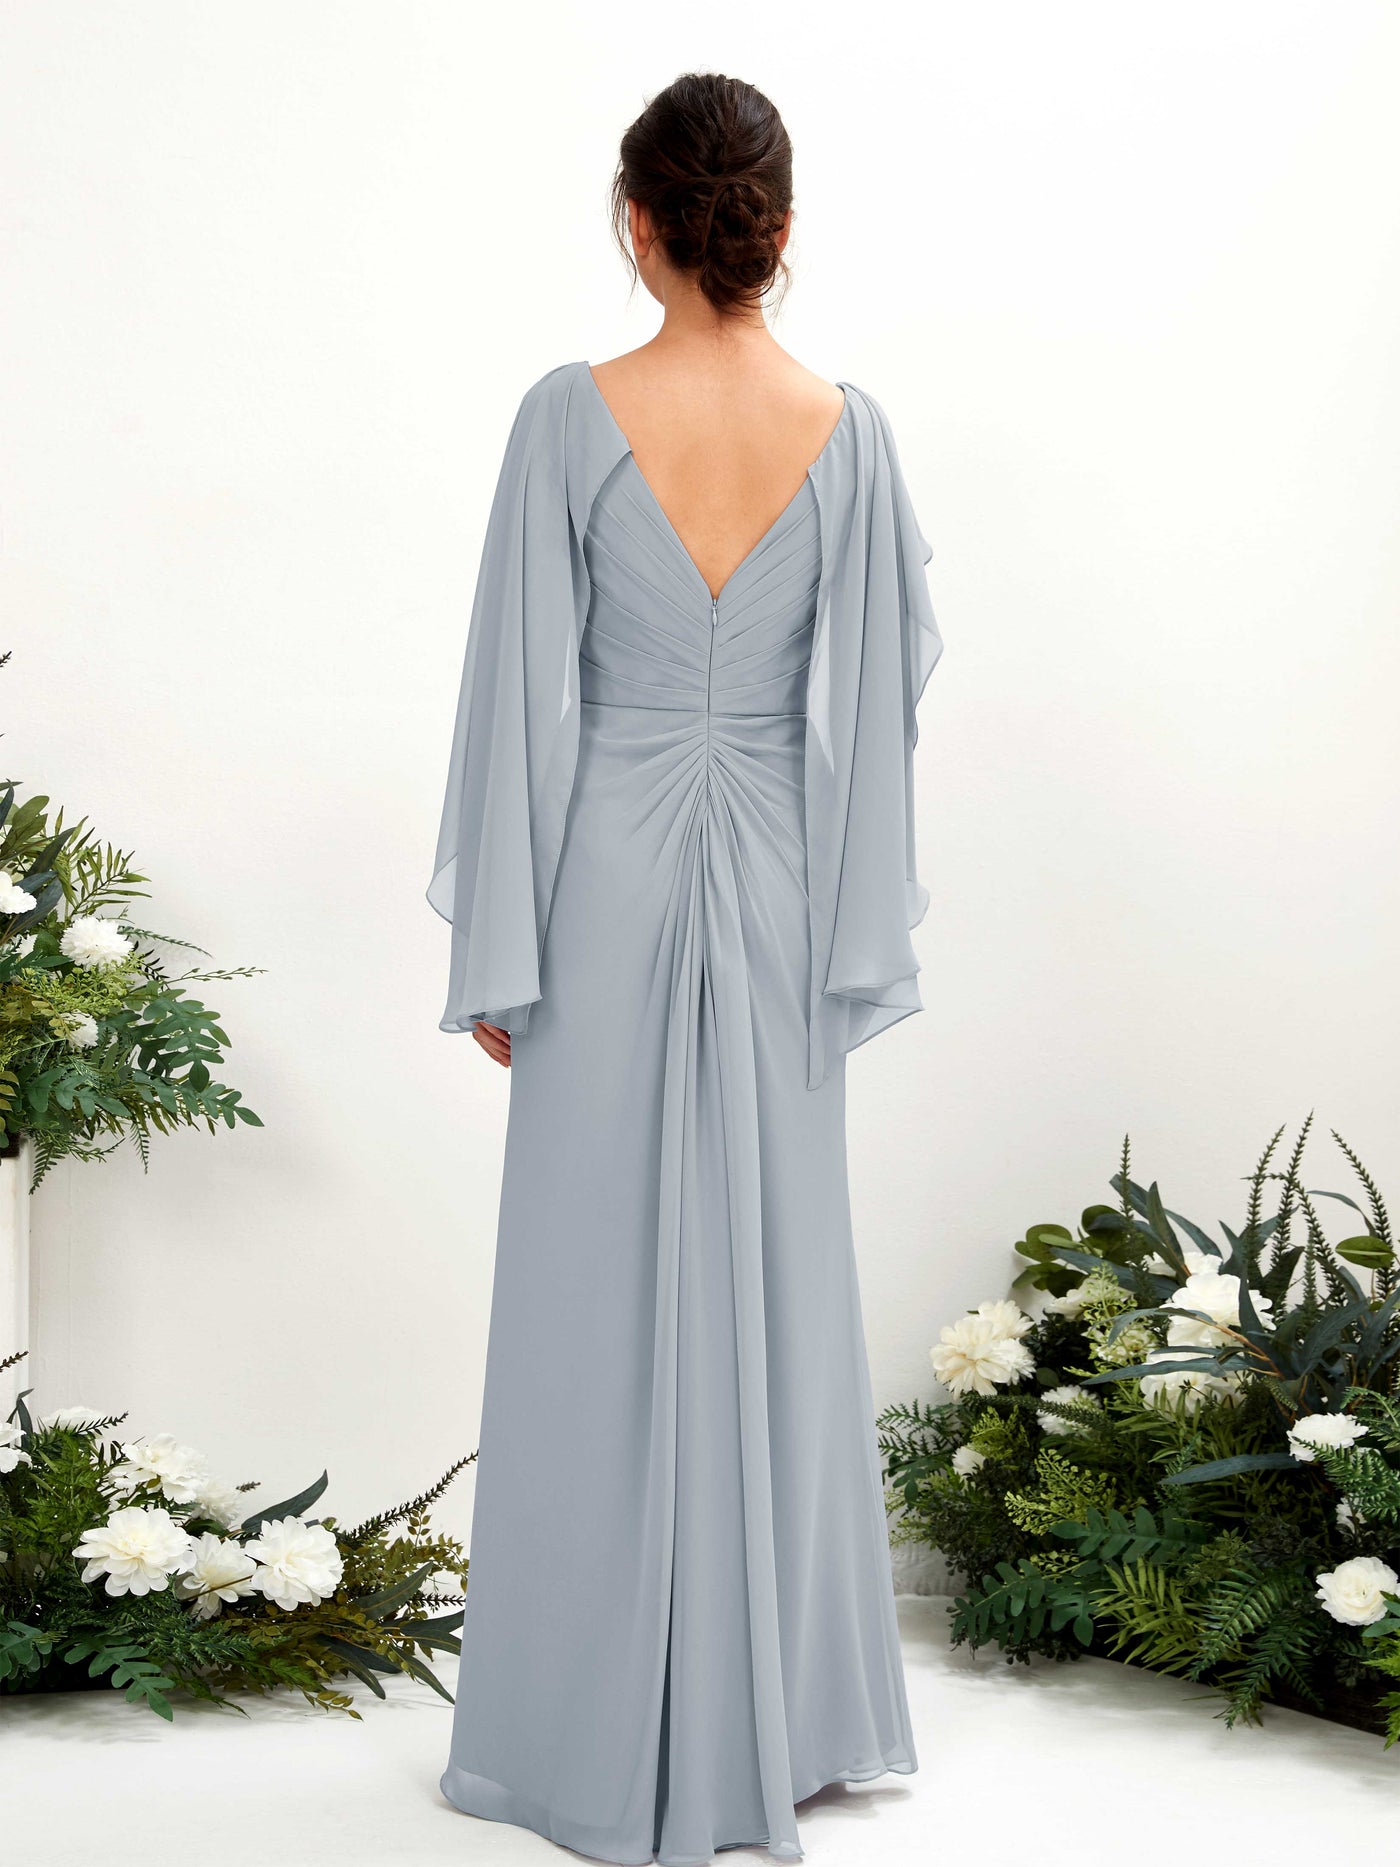 Dusty Blue-Upgrade Bridesmaid Dresses Bridesmaid Dress A-line Chiffon Straps Full Length Long Sleeves Wedding Party Dress (80220104)#color_dusty-blue-upgrade